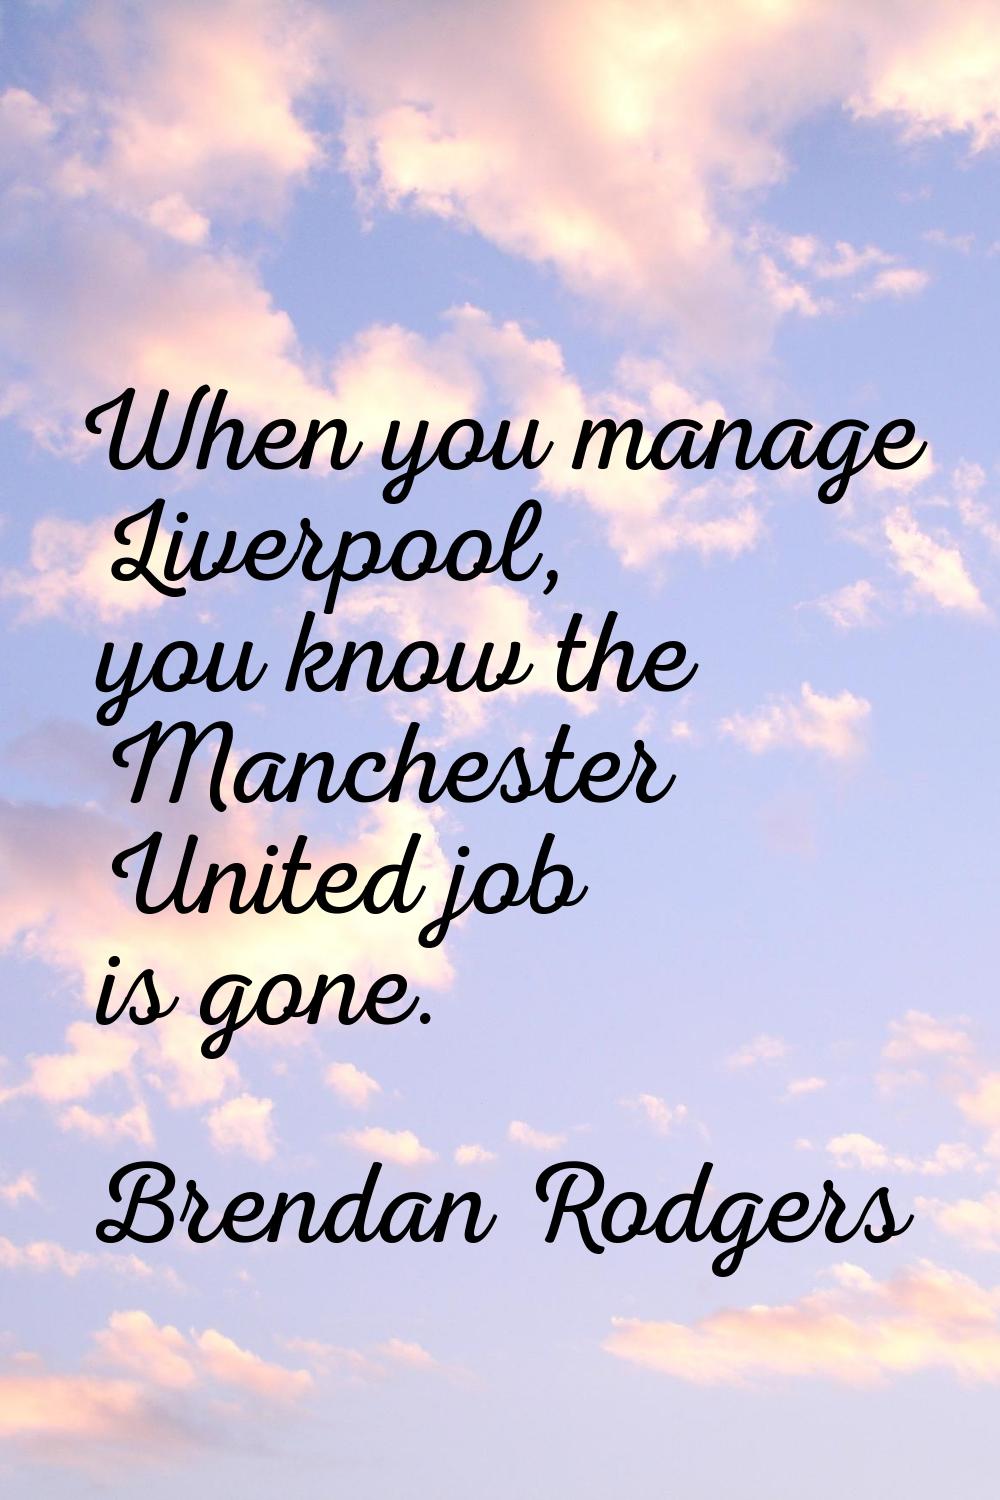 When you manage Liverpool, you know the Manchester United job is gone.